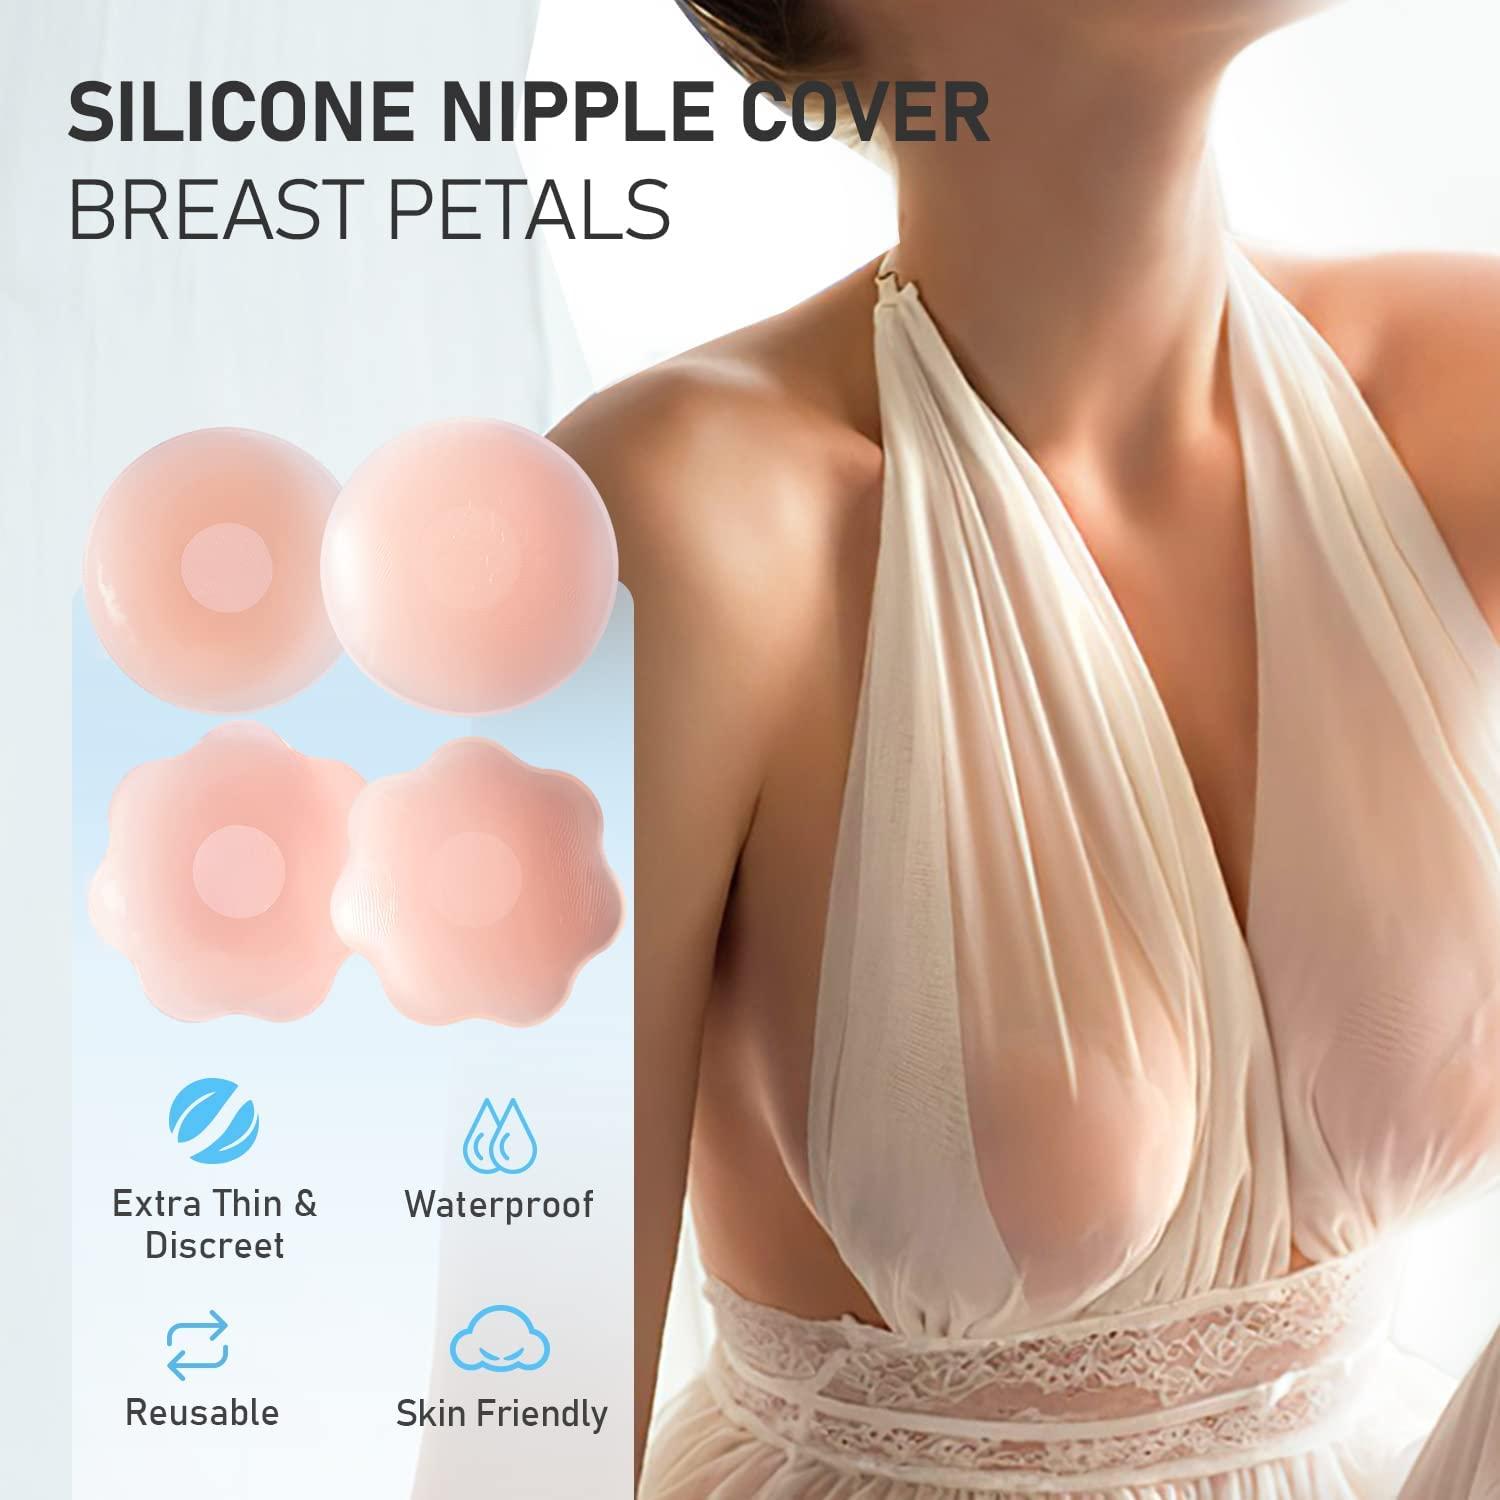 Chest Tape Boob Tape Lift Up Invisible Bra Sticky Nipple Cover Seamless  Paired Covers Push Up Breast Pads 